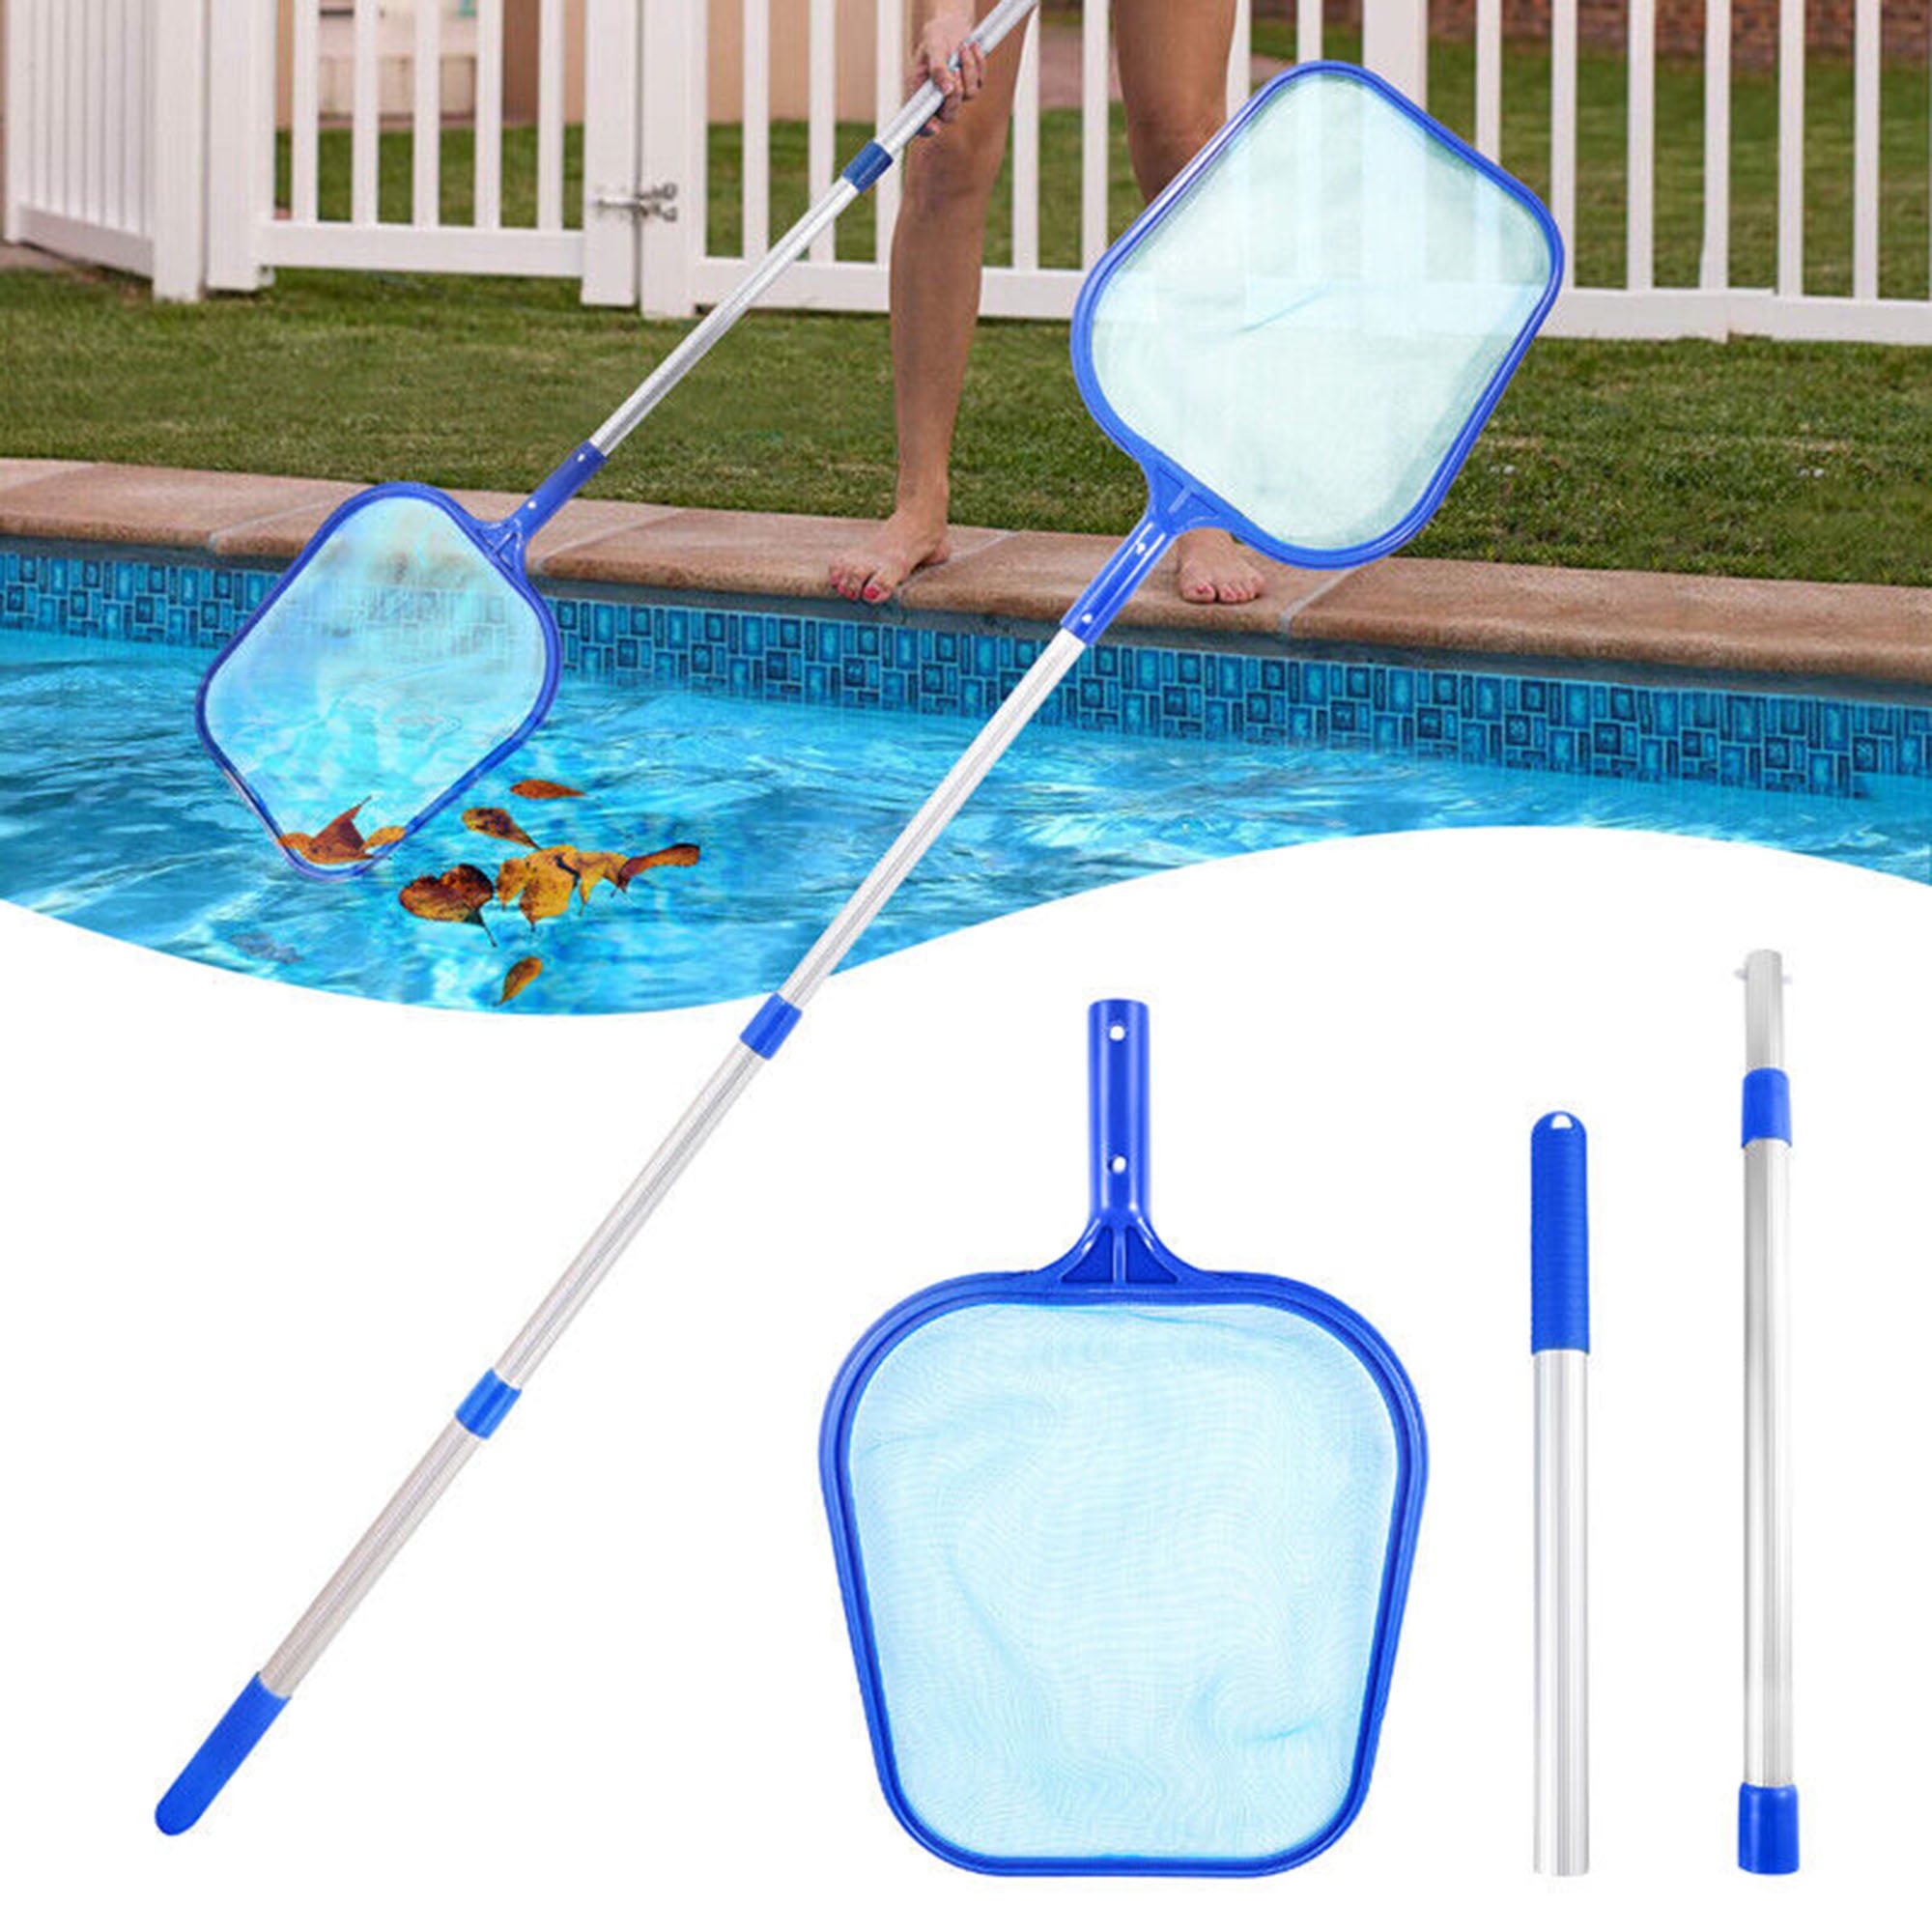 SHCKE Portable Swimming Pool Vacuum Cleaner Kit Pool Cleaning Set Extension  Pool Pole Pole Leaf Skimmer Mesh Net Rake Net for Cleaning Above Ground